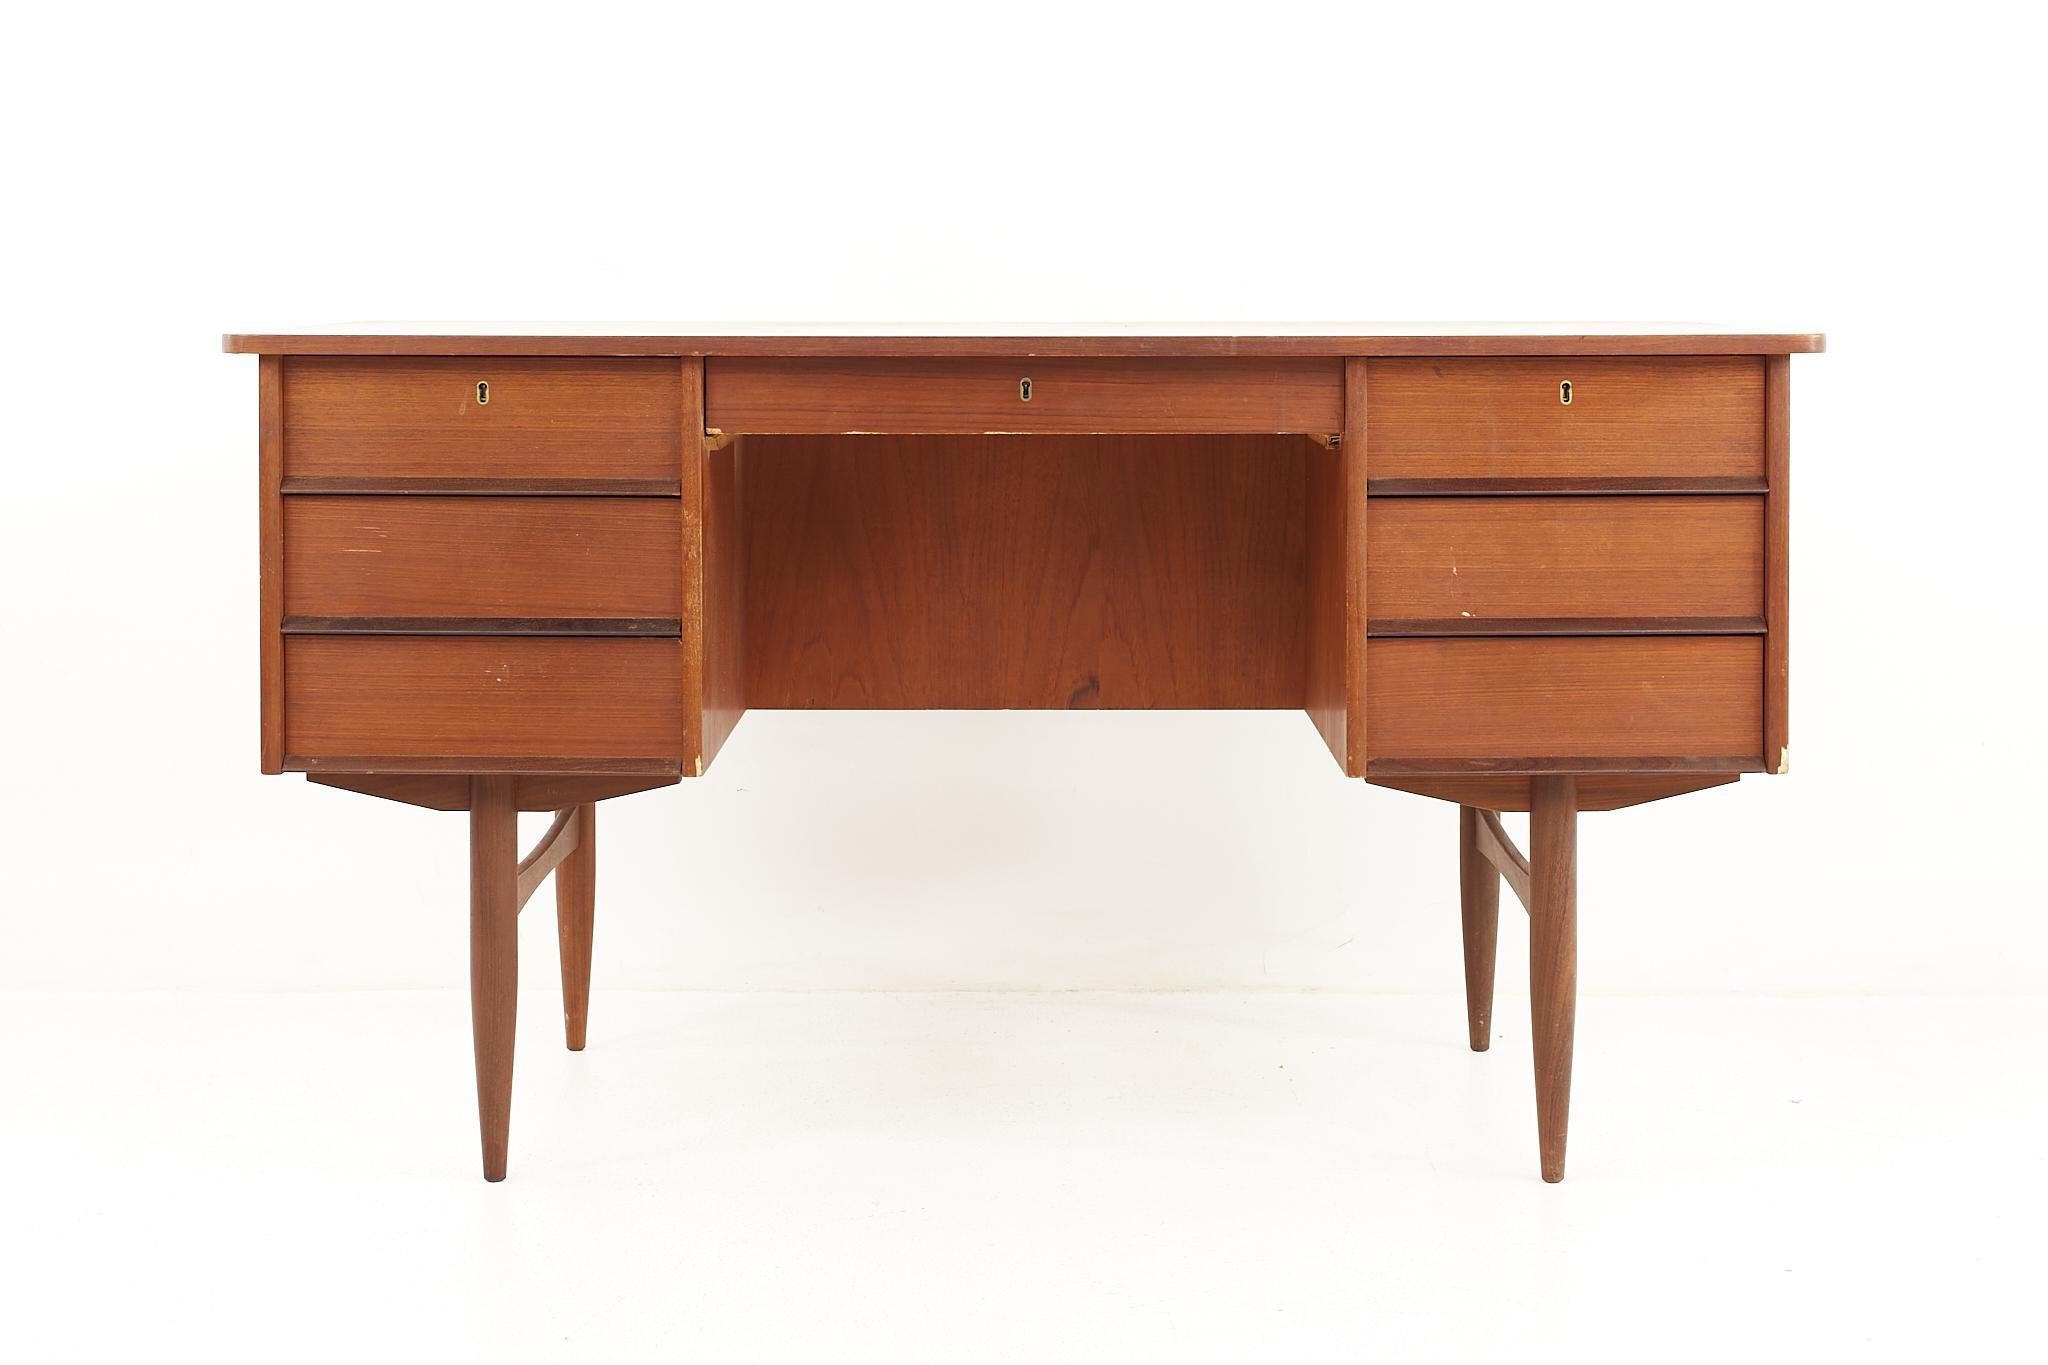 Maurice Villency style mid century teak desk with bookcase front

The desk measures: 52.5 wide x 26.25 deep x 28.75 high, with a chair clearance of 25.25 inches 

All pieces of furniture can be had in what we call restored vintage condition.